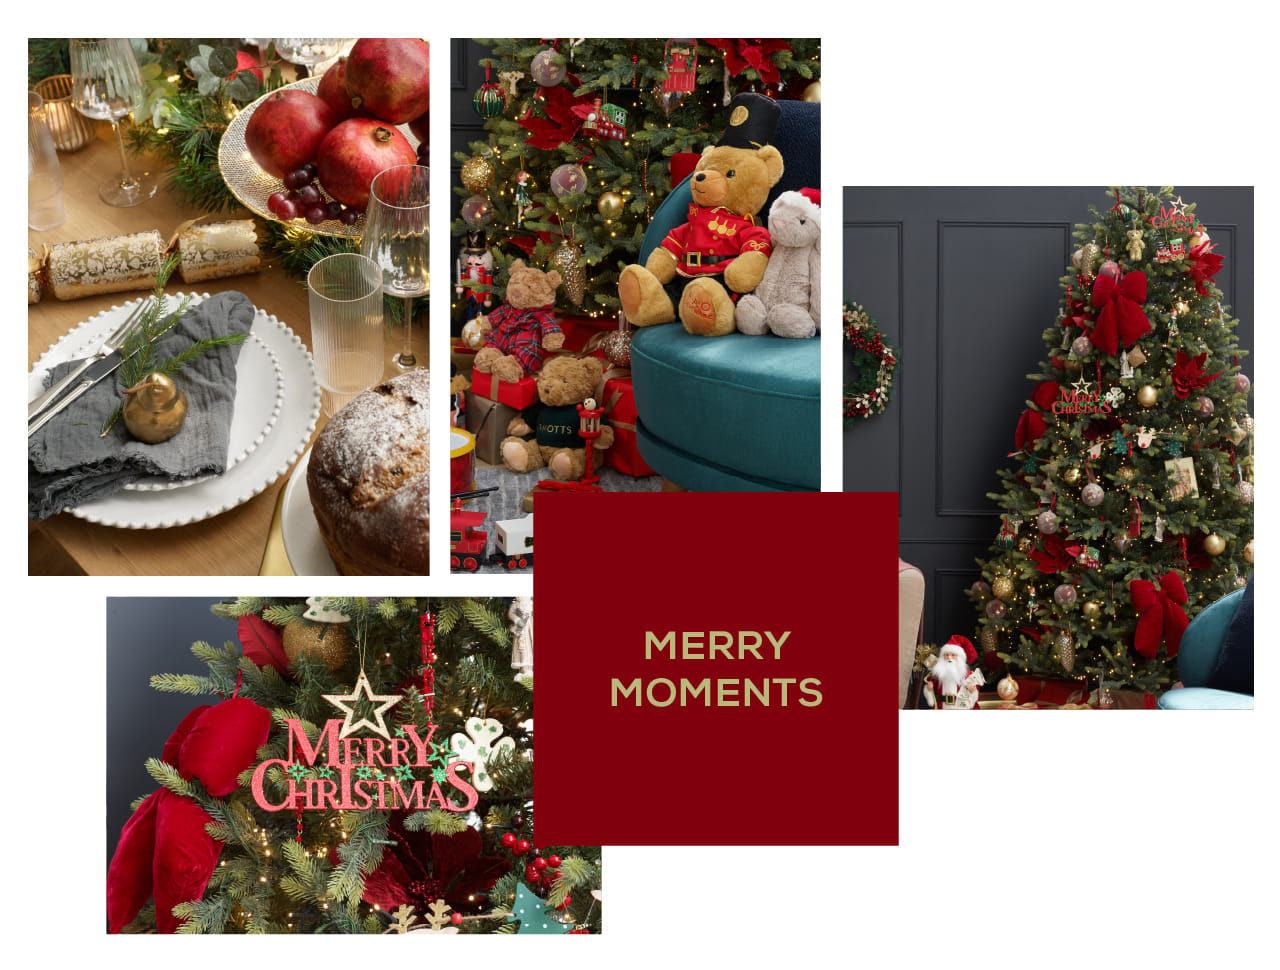 Collage of Christmas trees, decorations, tableware all in a red & green colour scheme